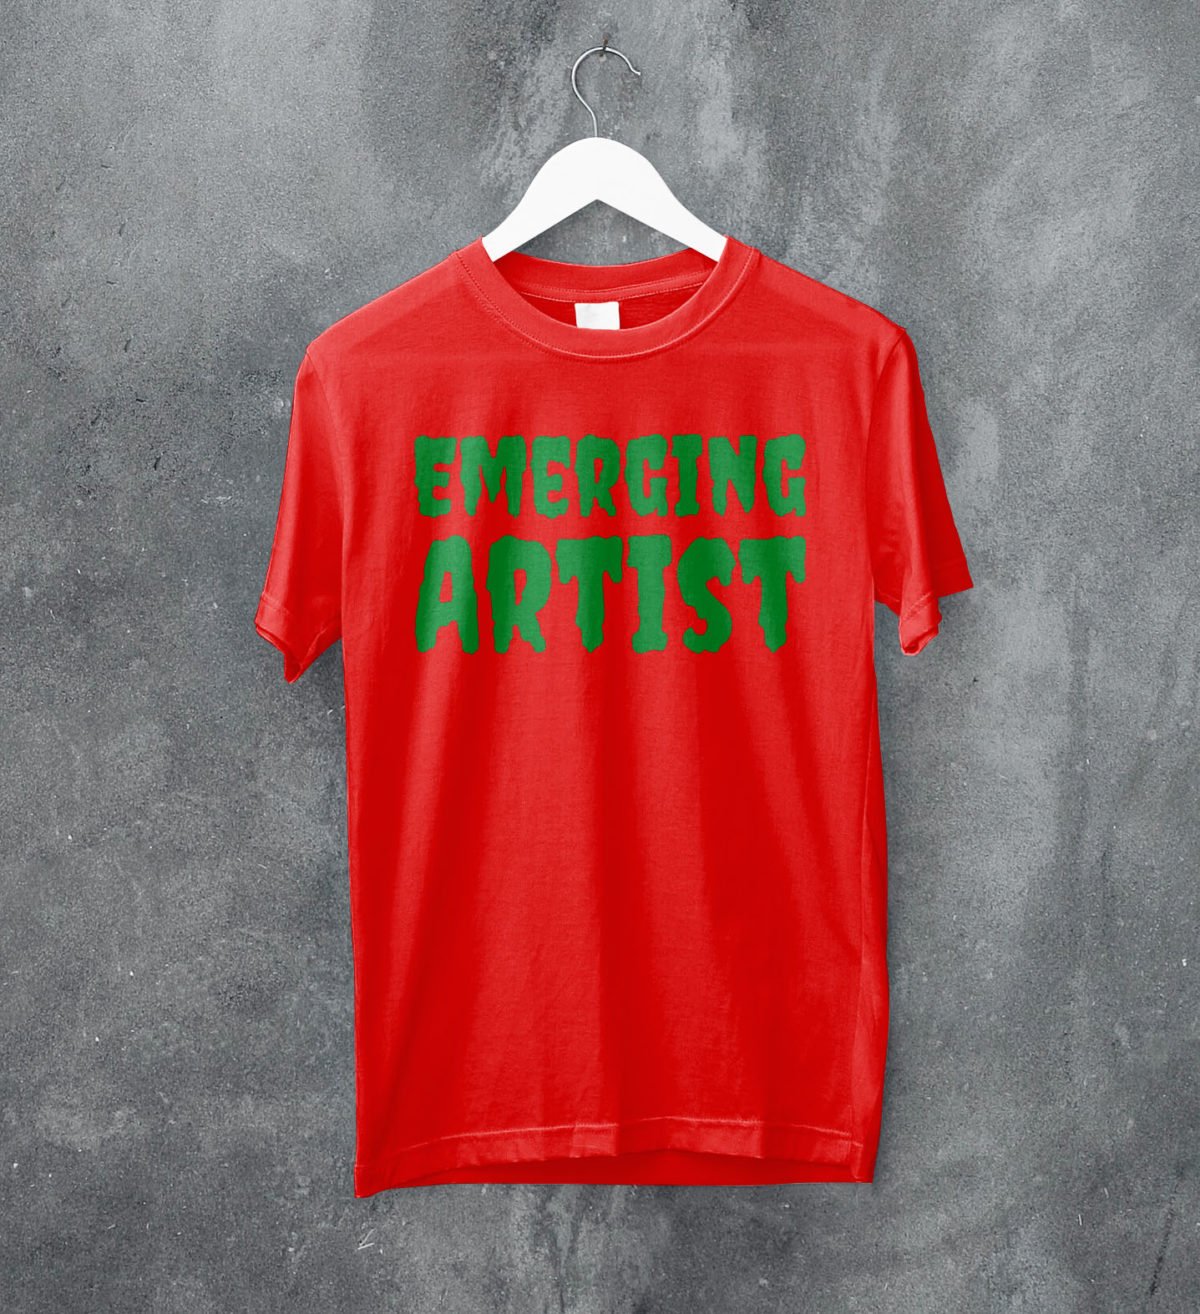 A photo of a red T-shirt with the words 'Emerging Artist' in a horror-film typeface printed on it in lurid green ink